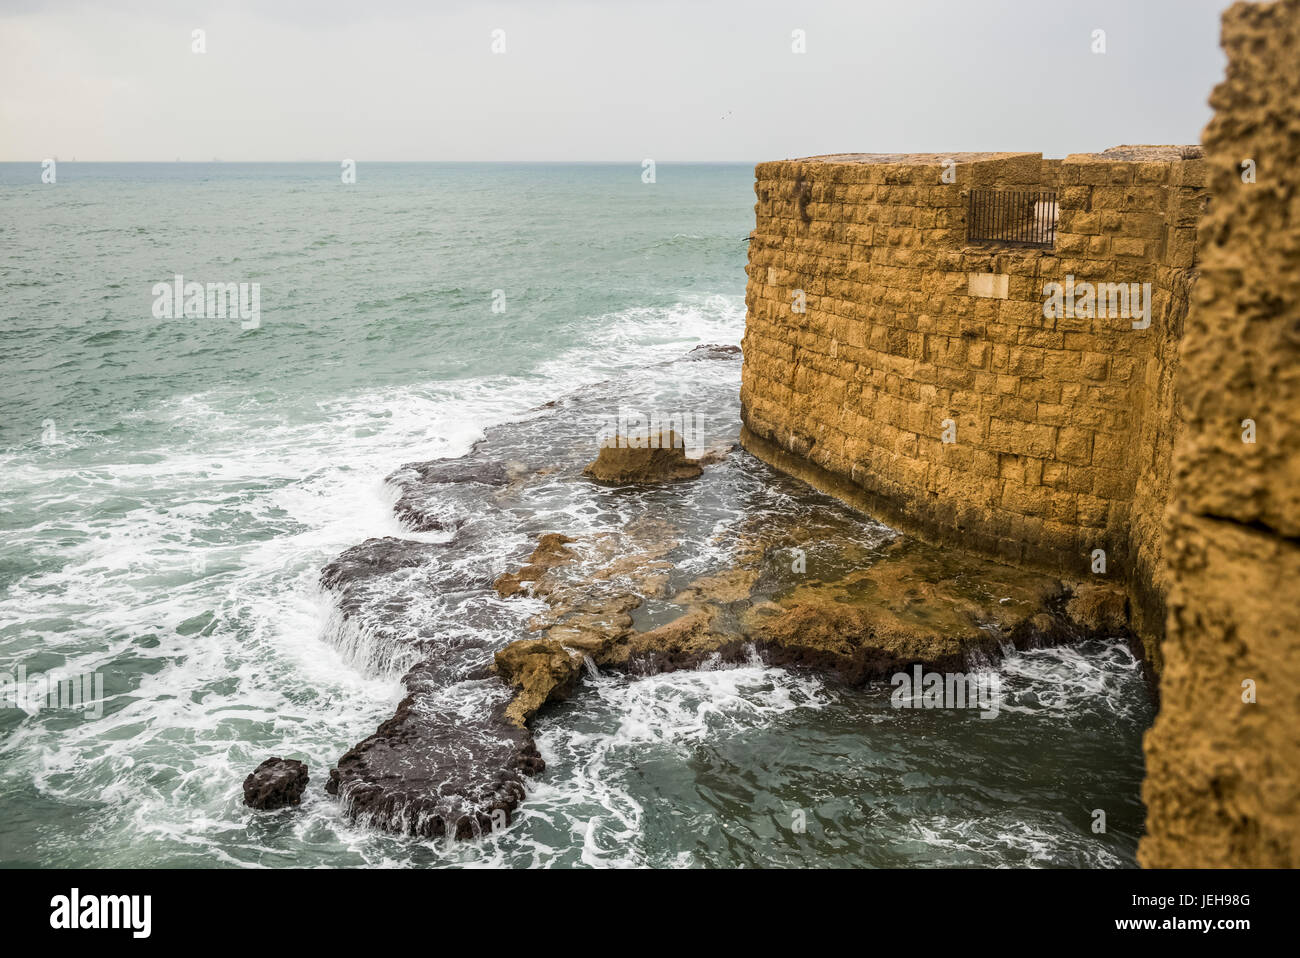 Stone wall along the water's edge with a view of the Mediterranean Sea; Haifa District, Israel Stock Photo